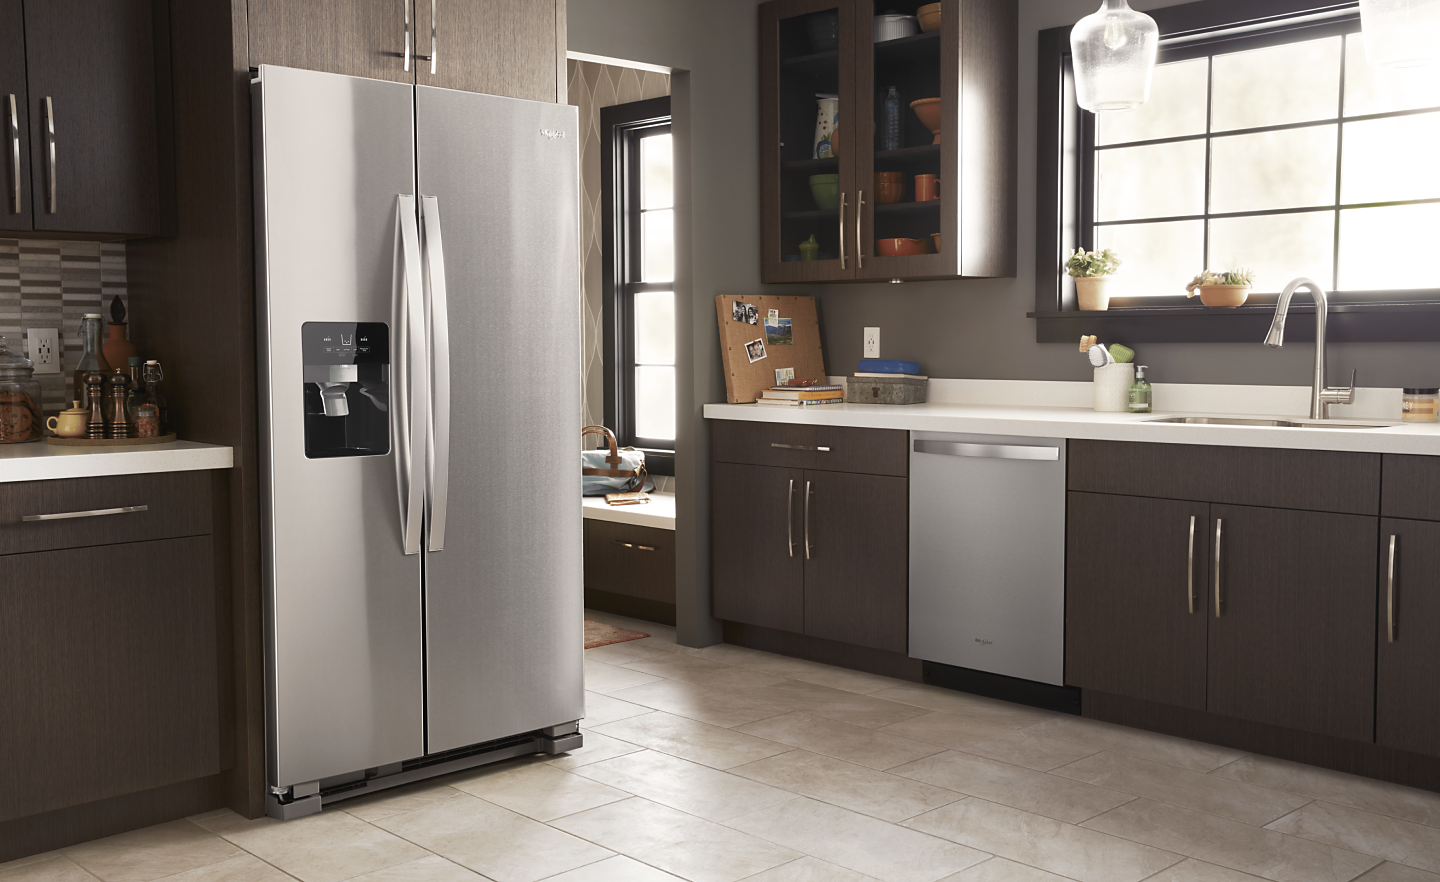 Modern kitchen with stainless steel side-by-side refrigerator